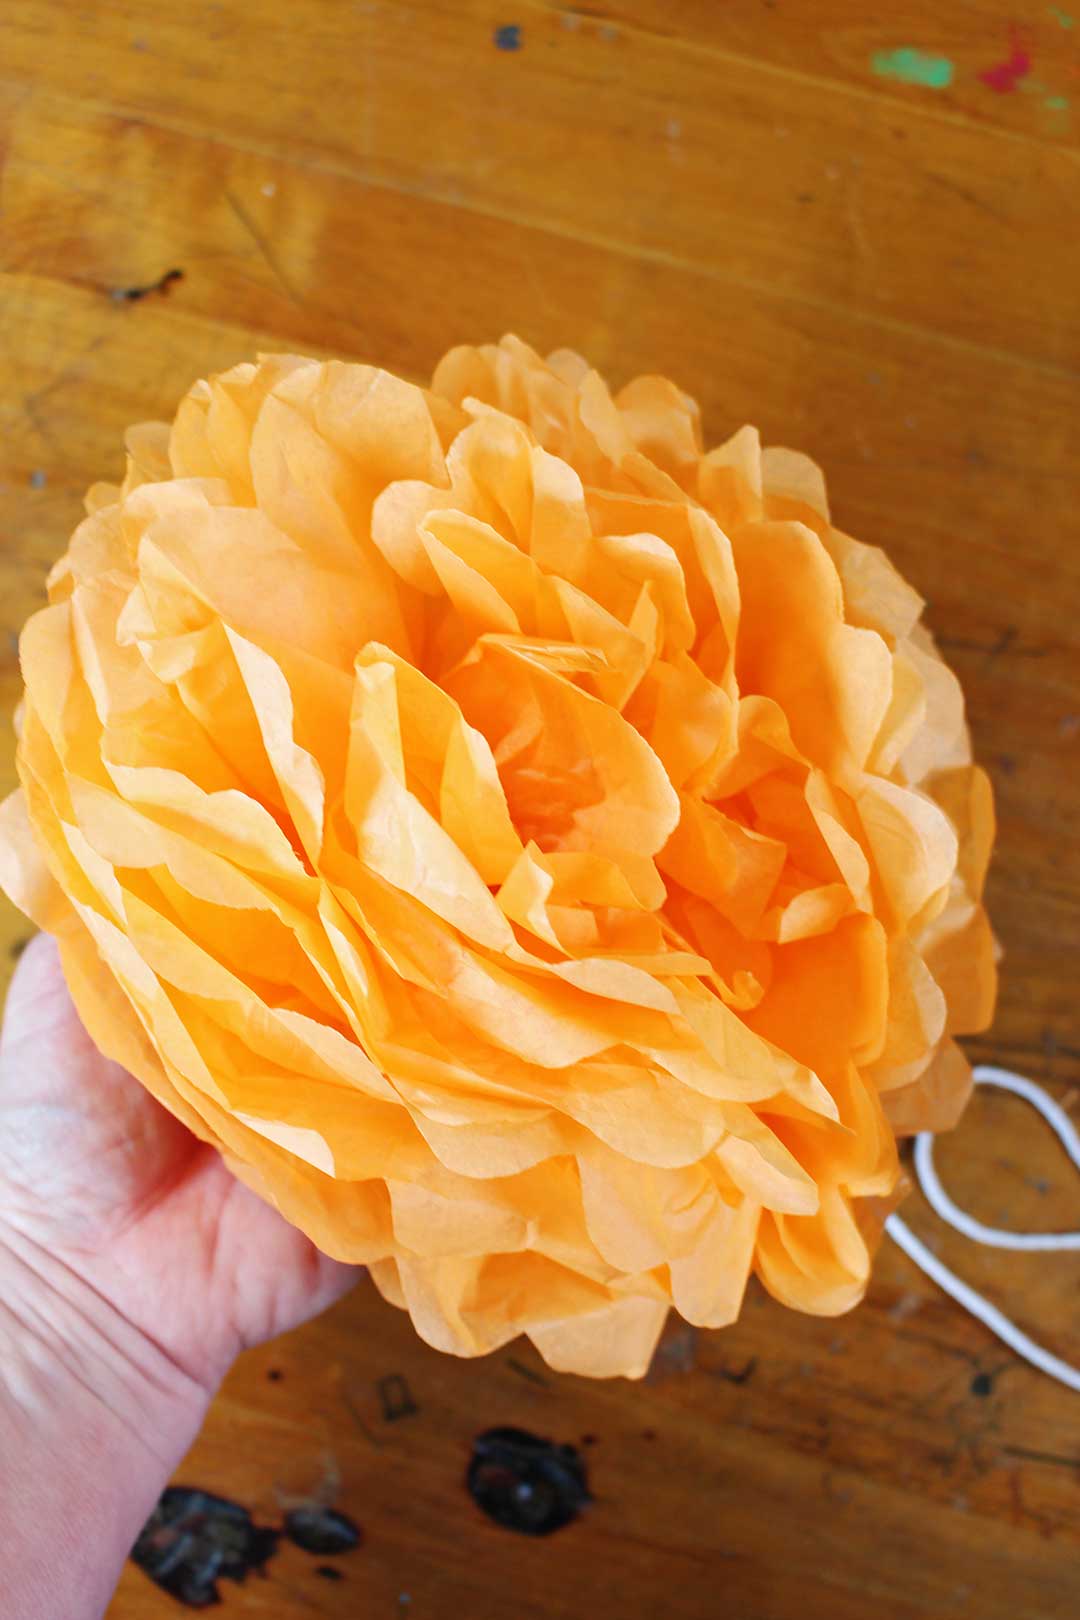 Easy Tissue Paper Flowers DIY - Welcome To Nana's